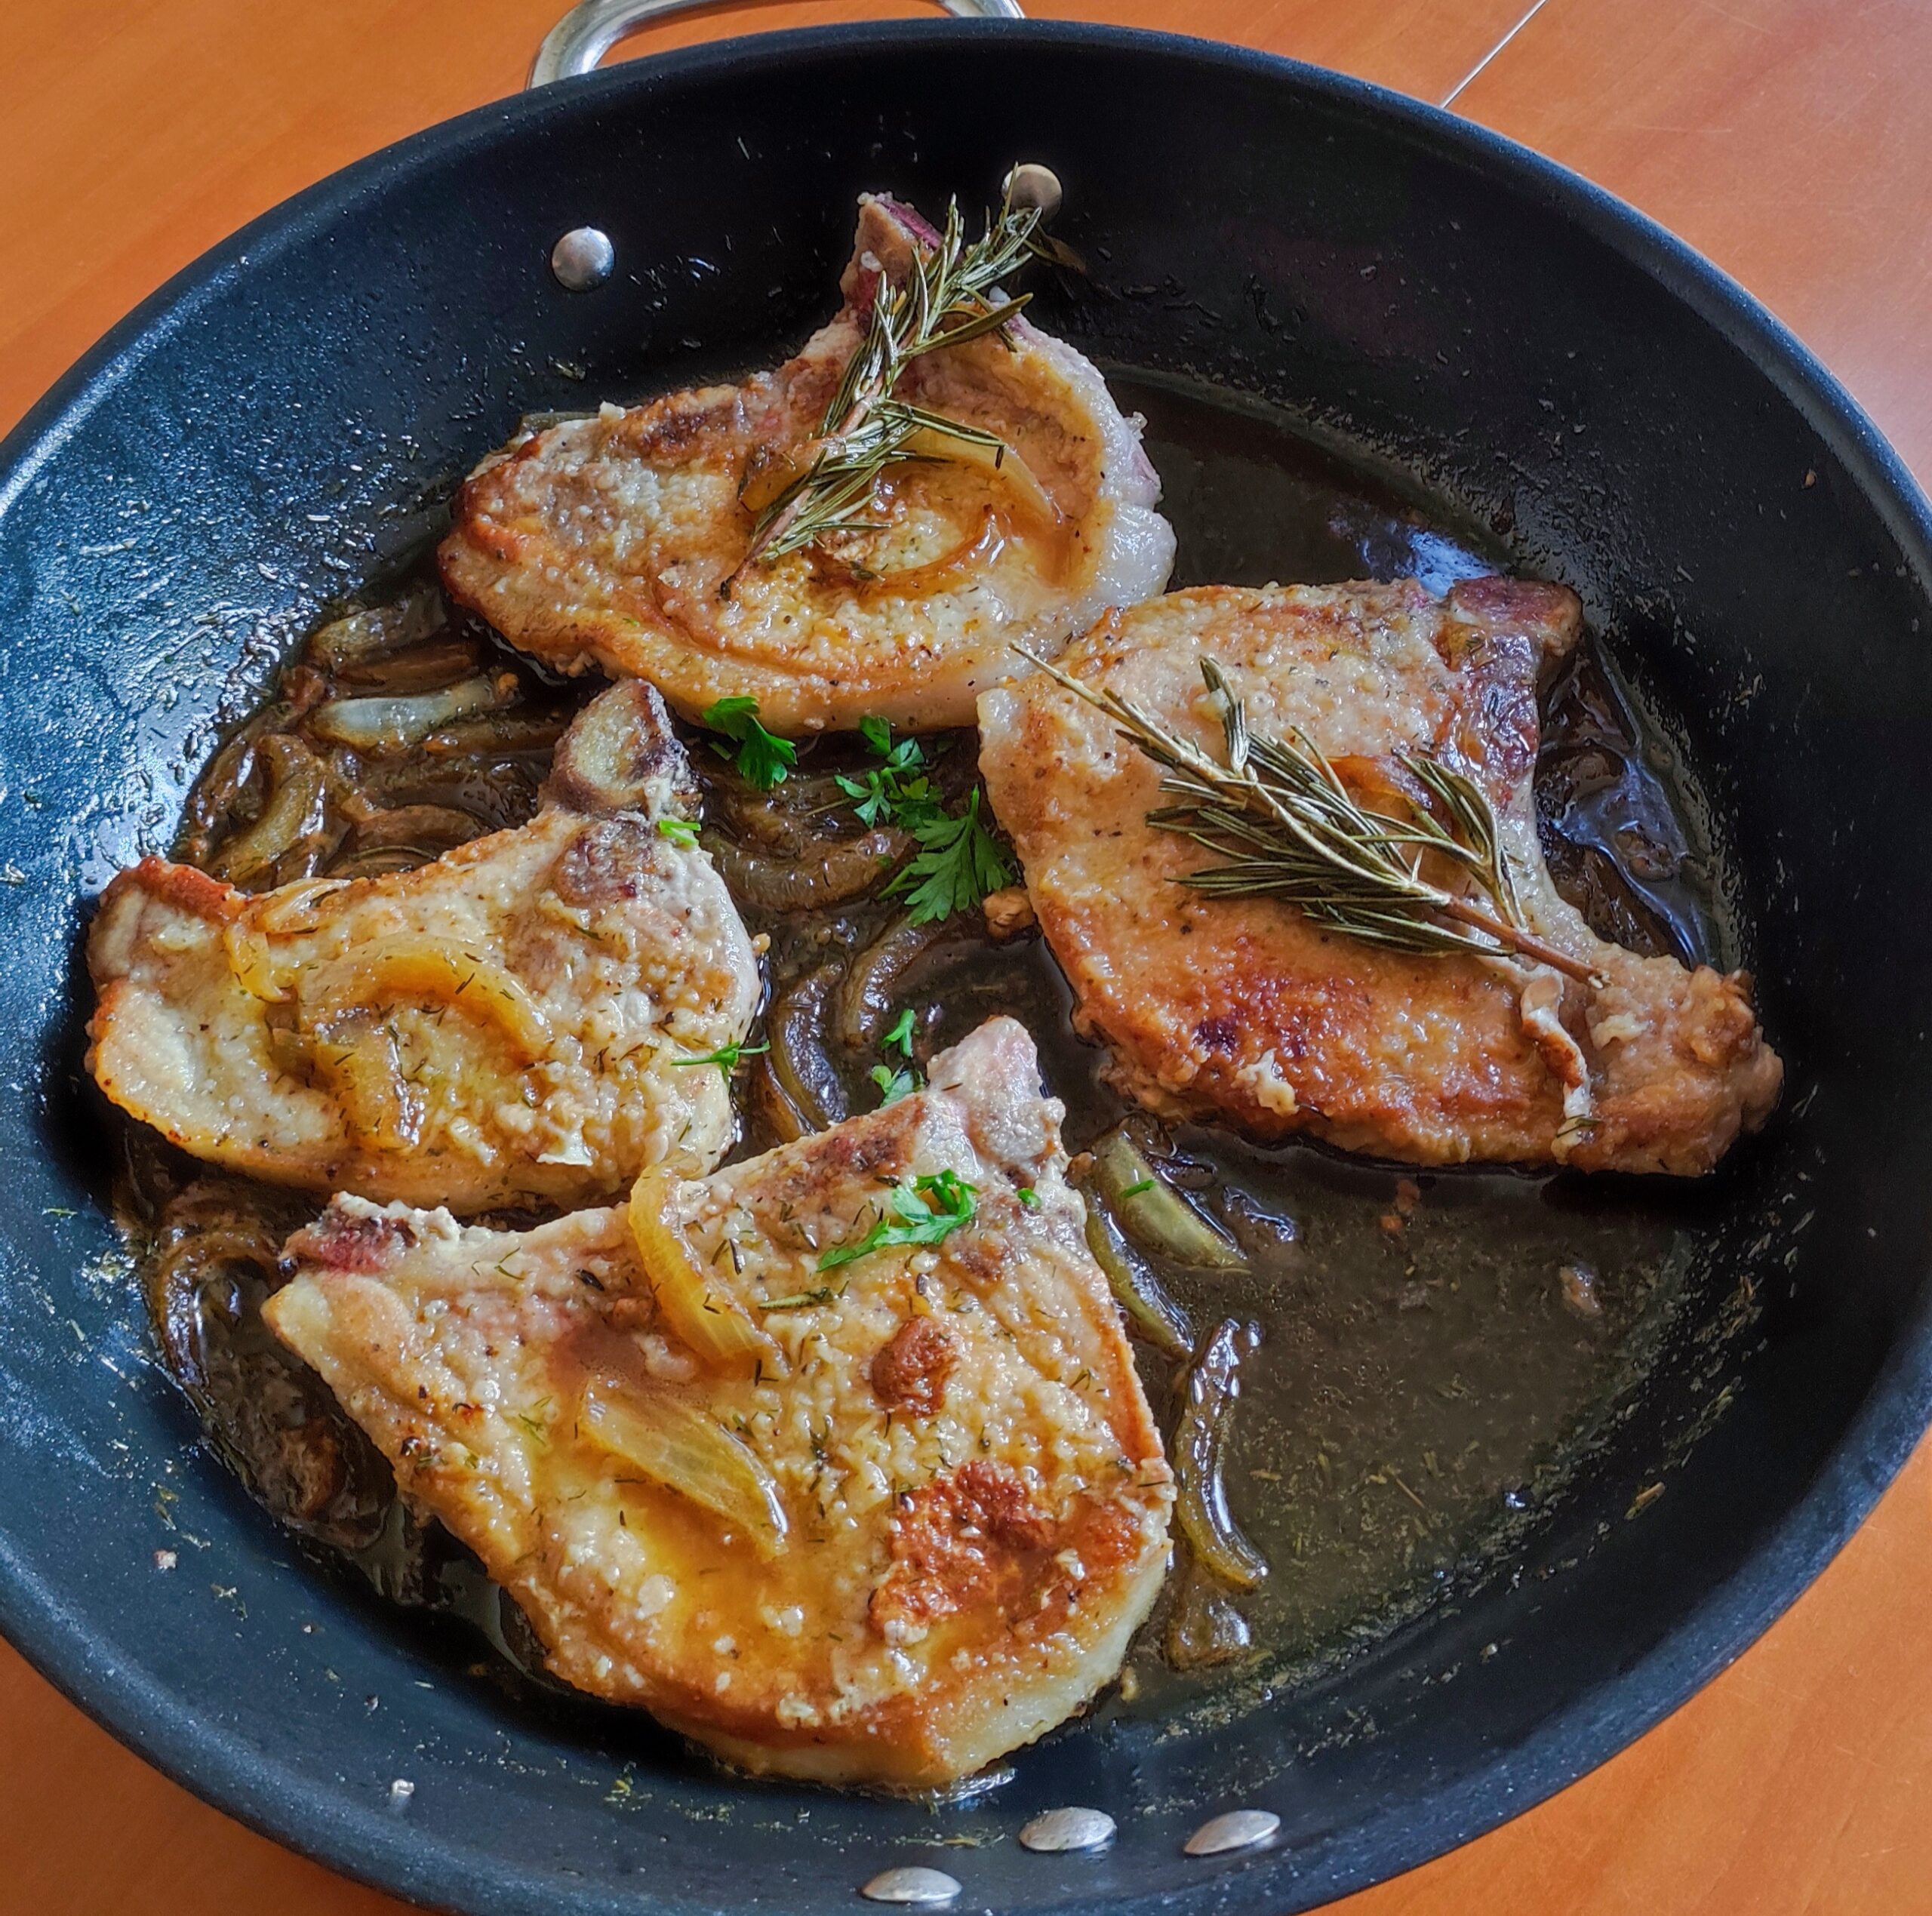 Enjoy This Mouthwatering Thin Pork Chop Recipe at Home